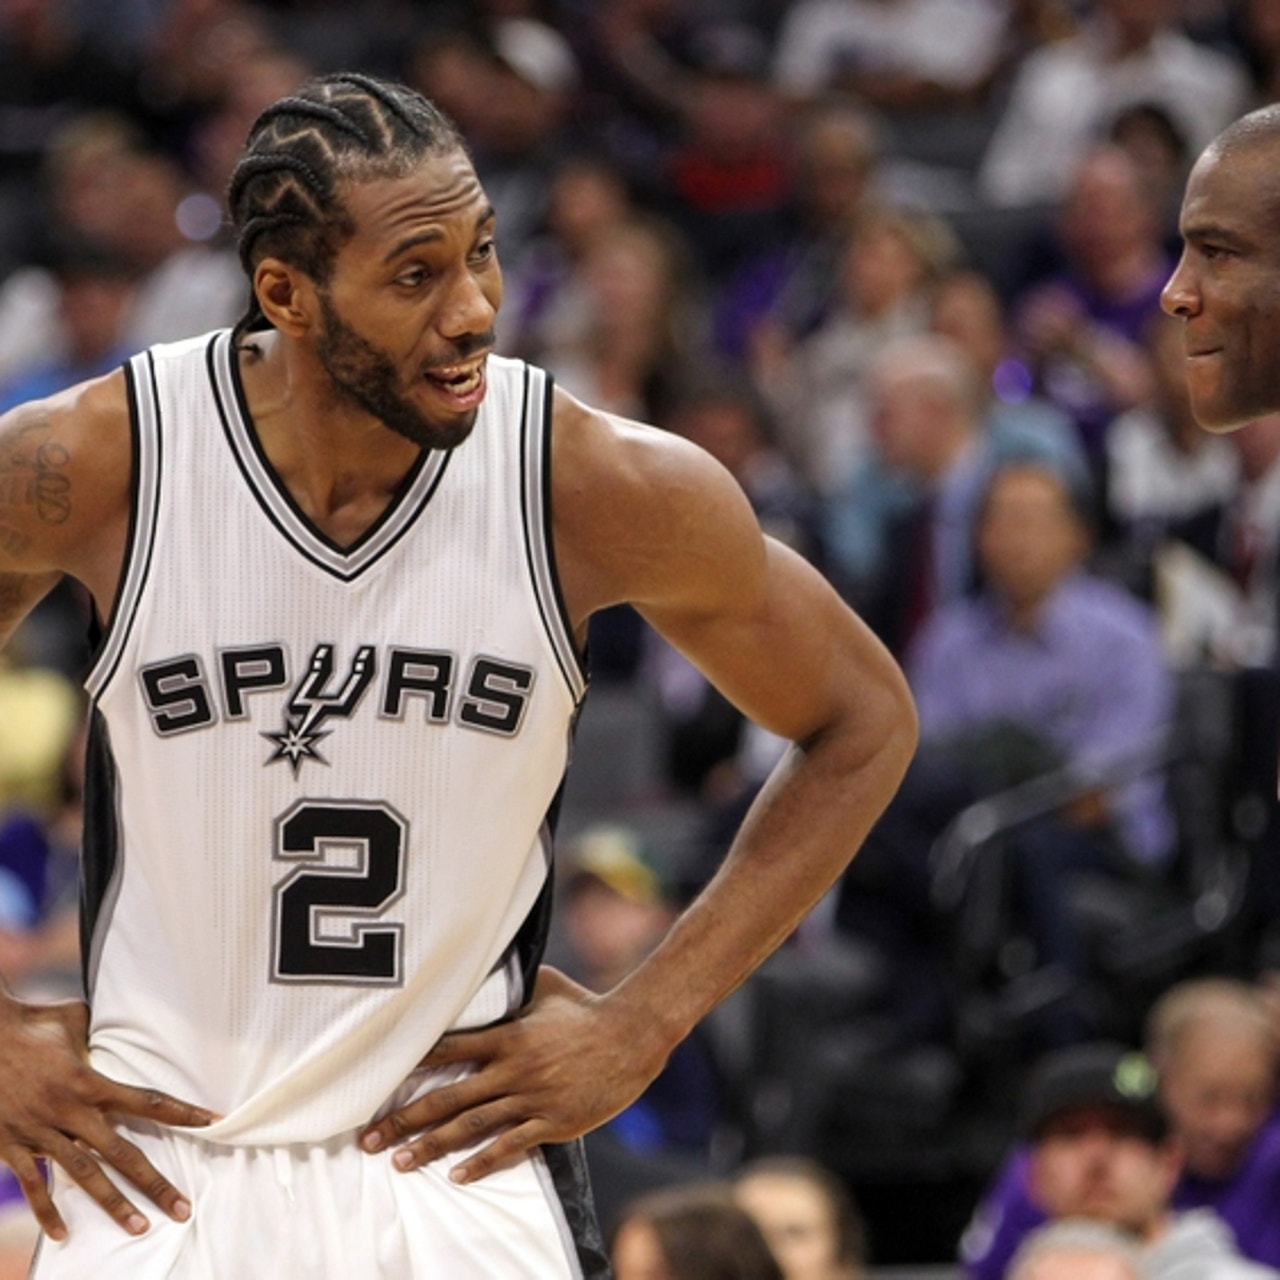 Kawhi Leonard vows this years team will be better than last